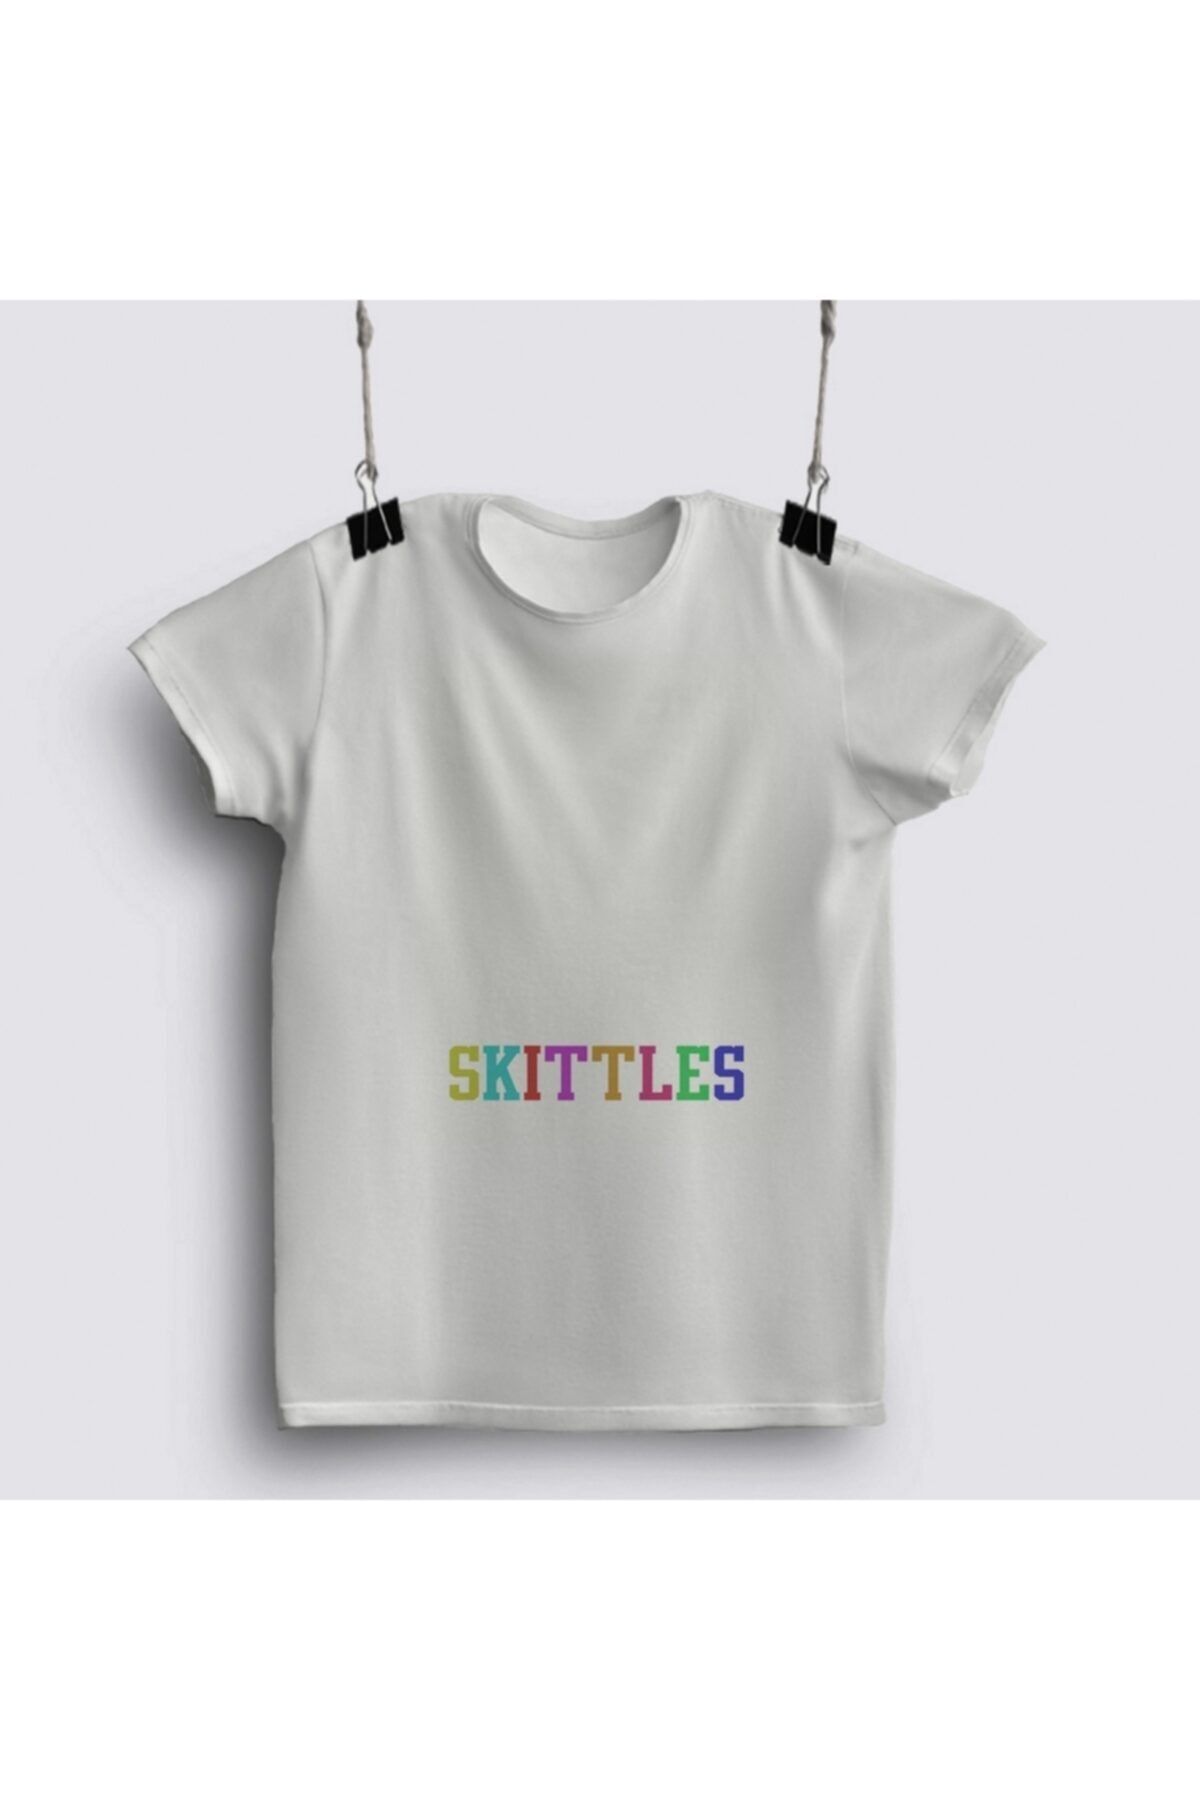 Fizello More Confused Than A Chameleon In A Bag Of Skittles T-shirt